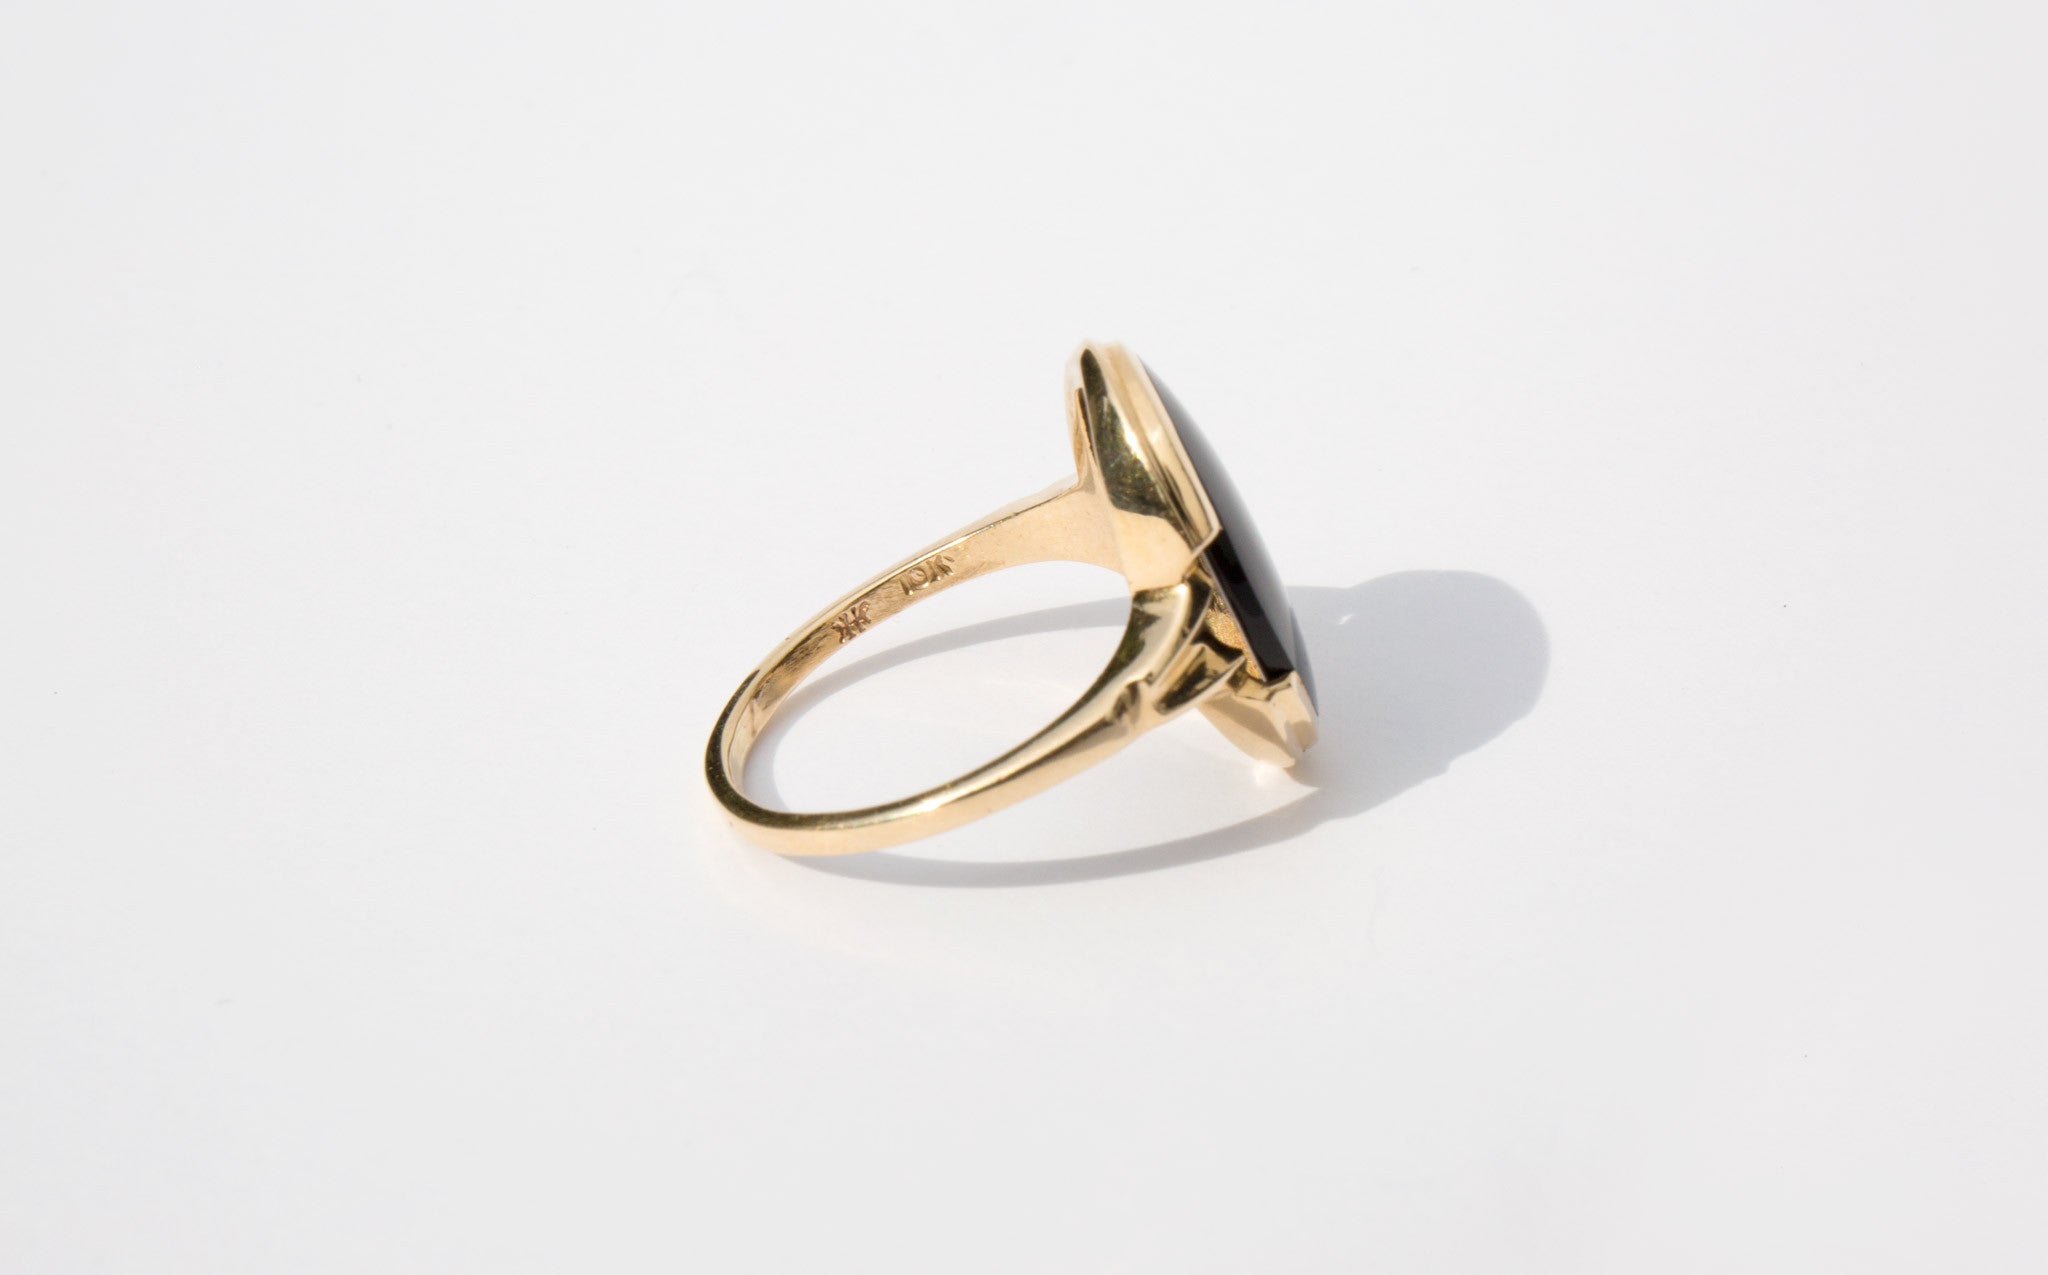 Gold and Onyx Ring